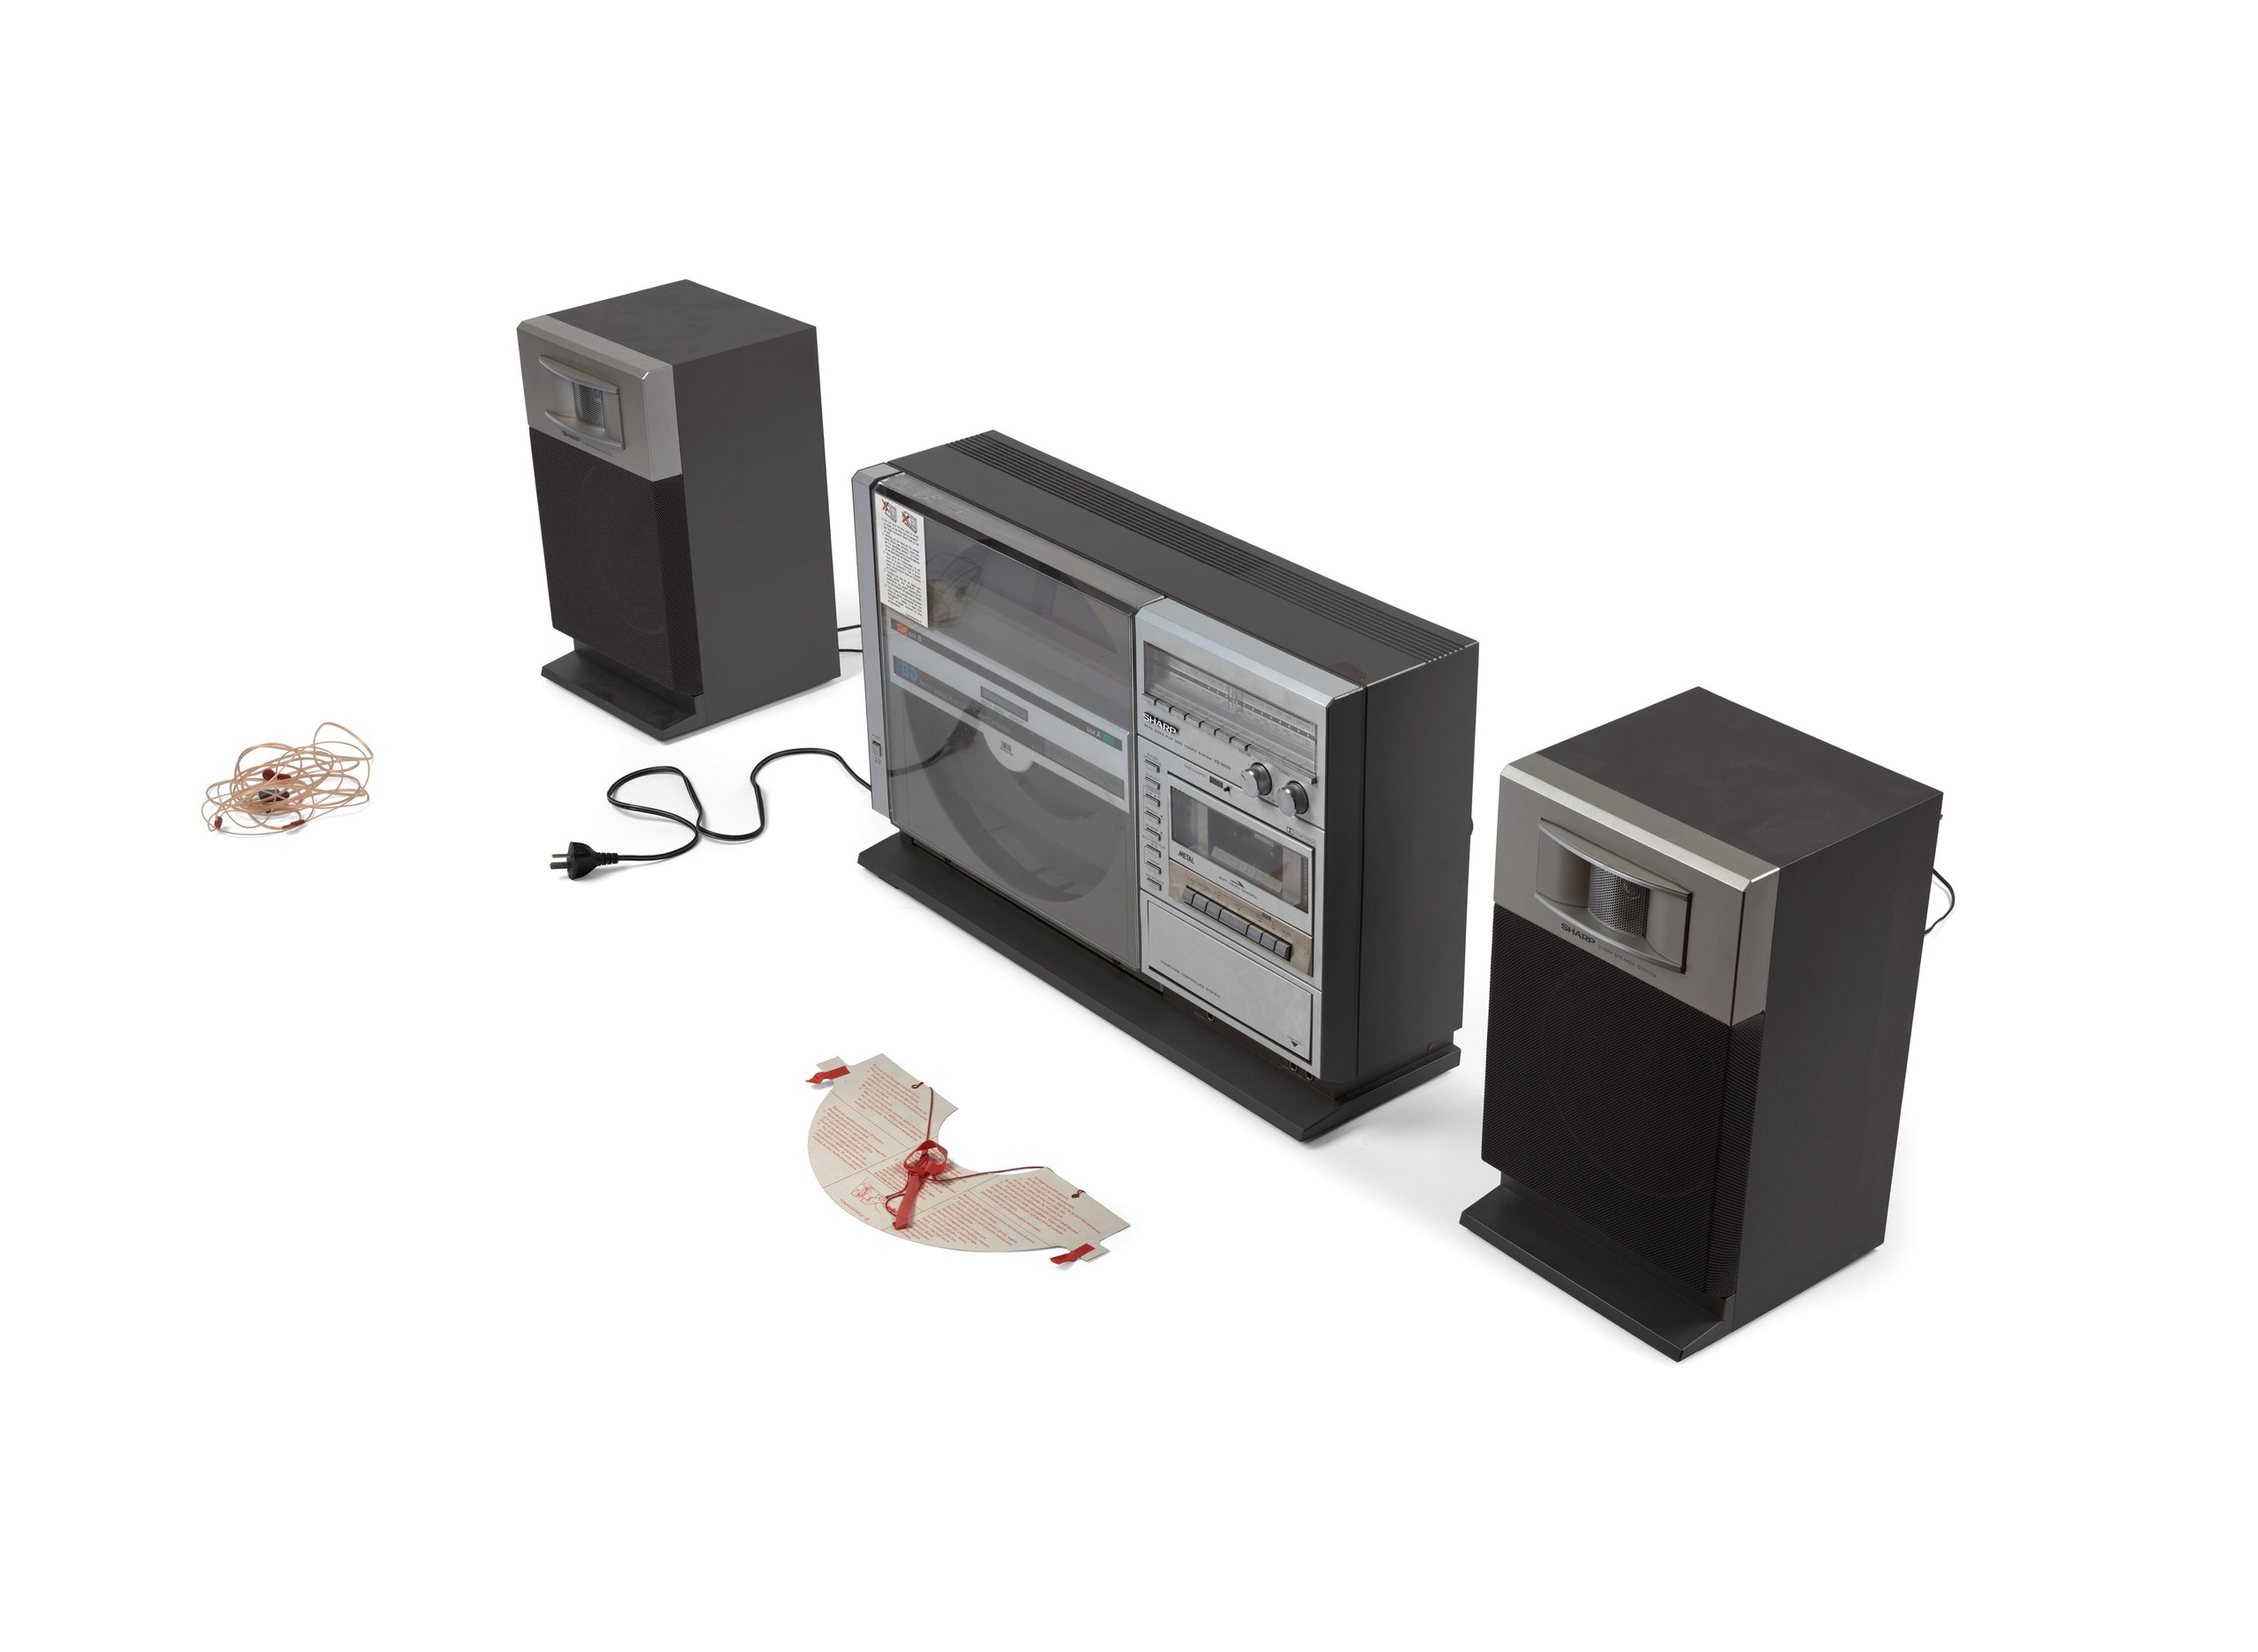 Audio disc system and speakers made by Sharp Corporation